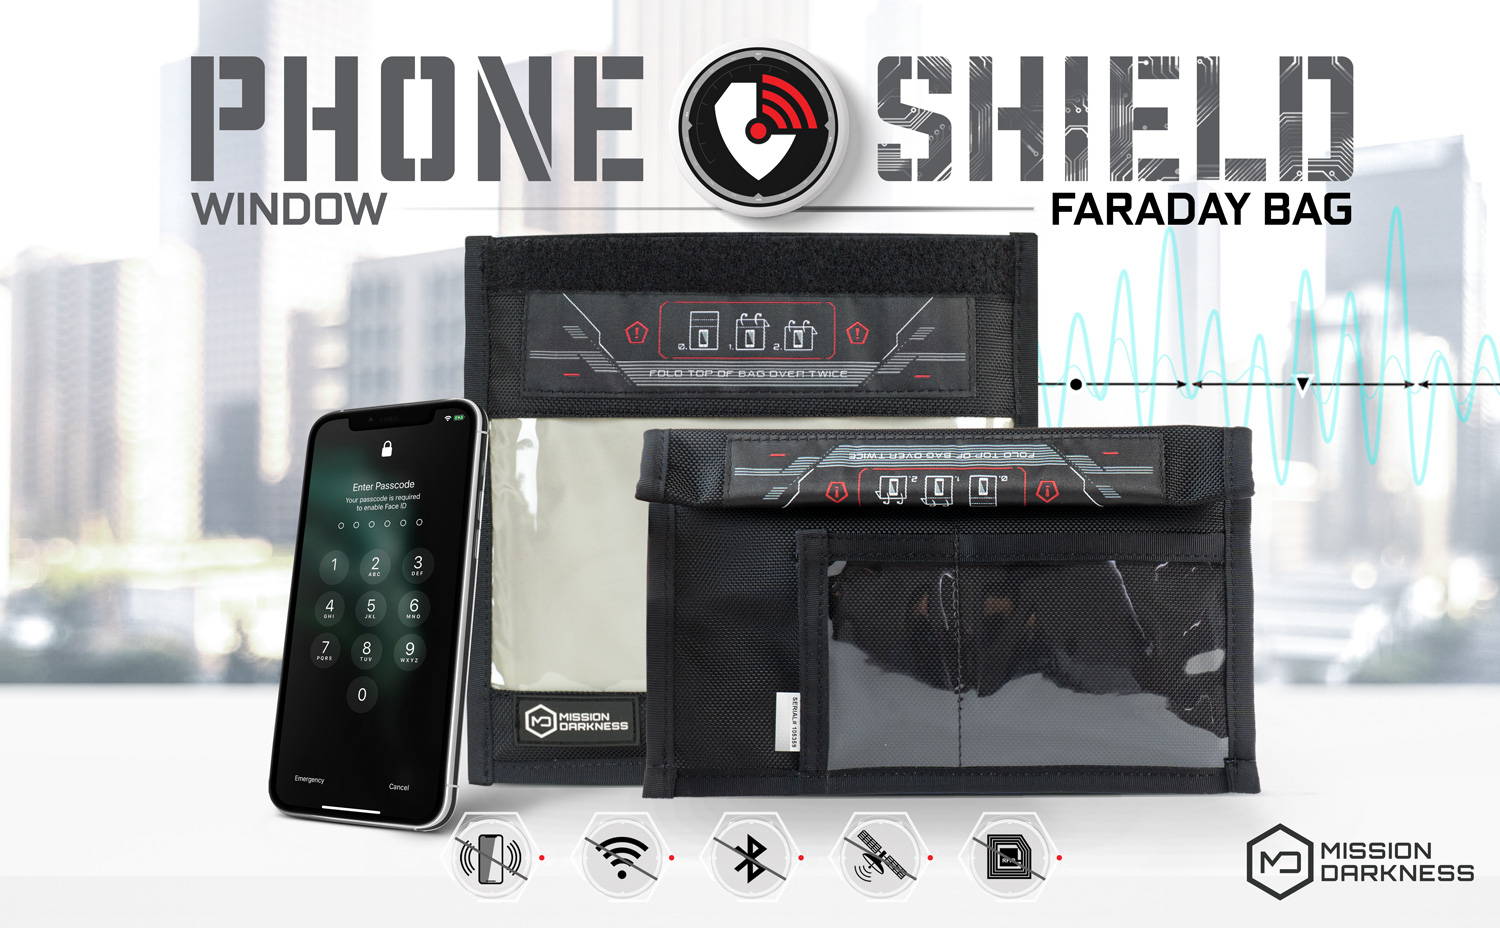 Mission Darkness Window Faraday bag for cell phones and handheld devices blocks wireless signals